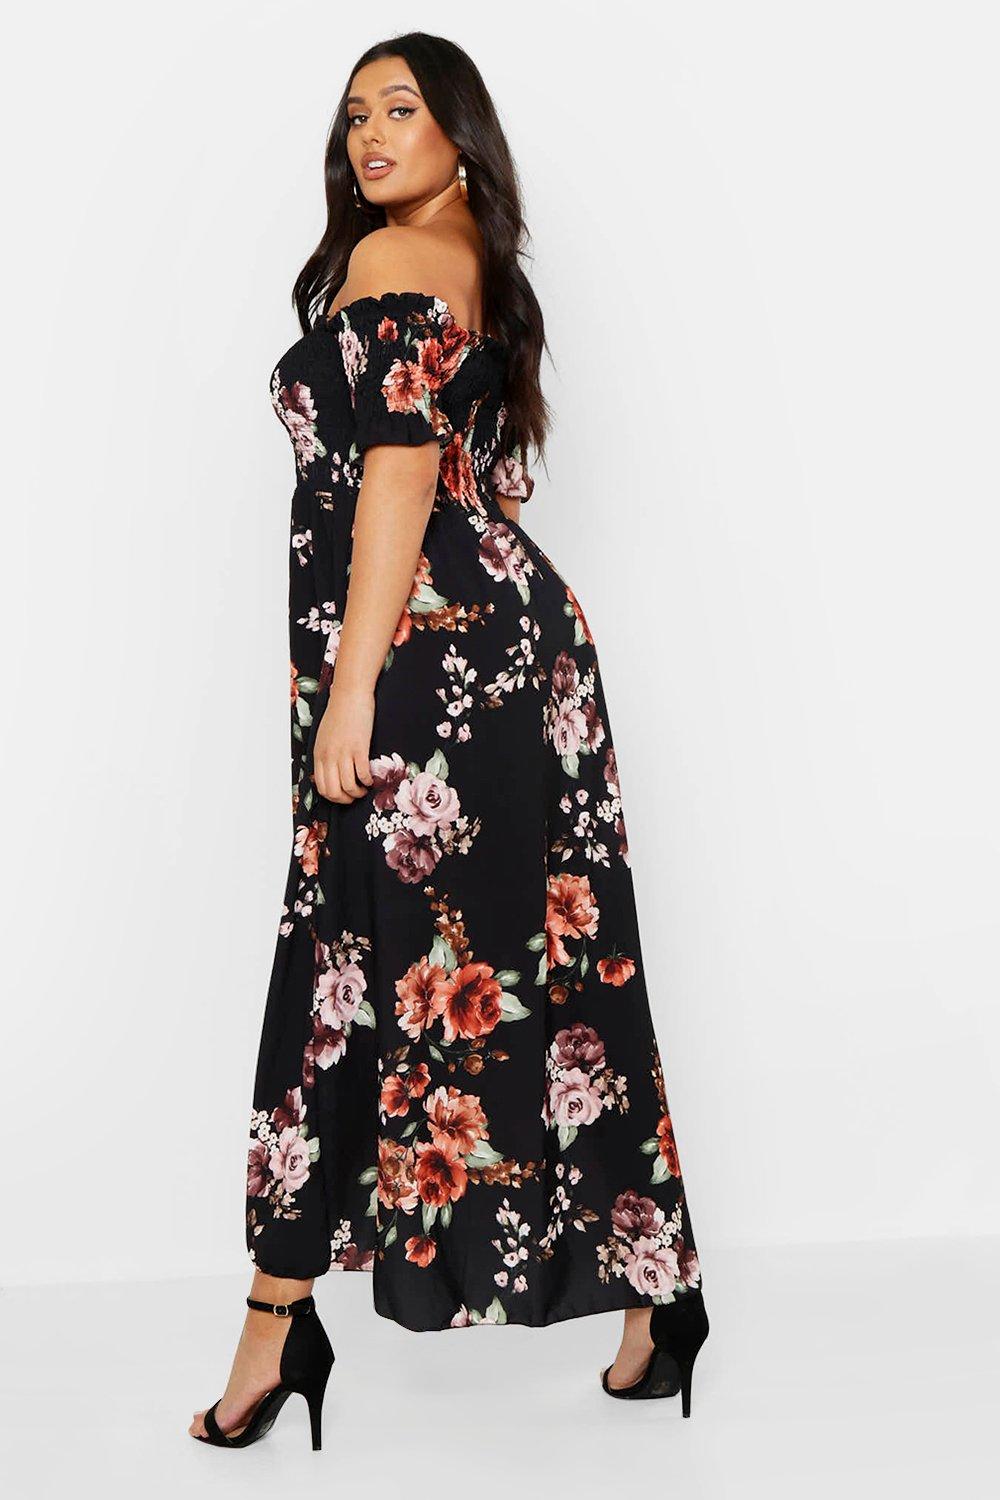 JUEBO Summer Dresses for Women Off Shoulder Plus Size Maxi Dress Flowing Floral Print Ball Gown 